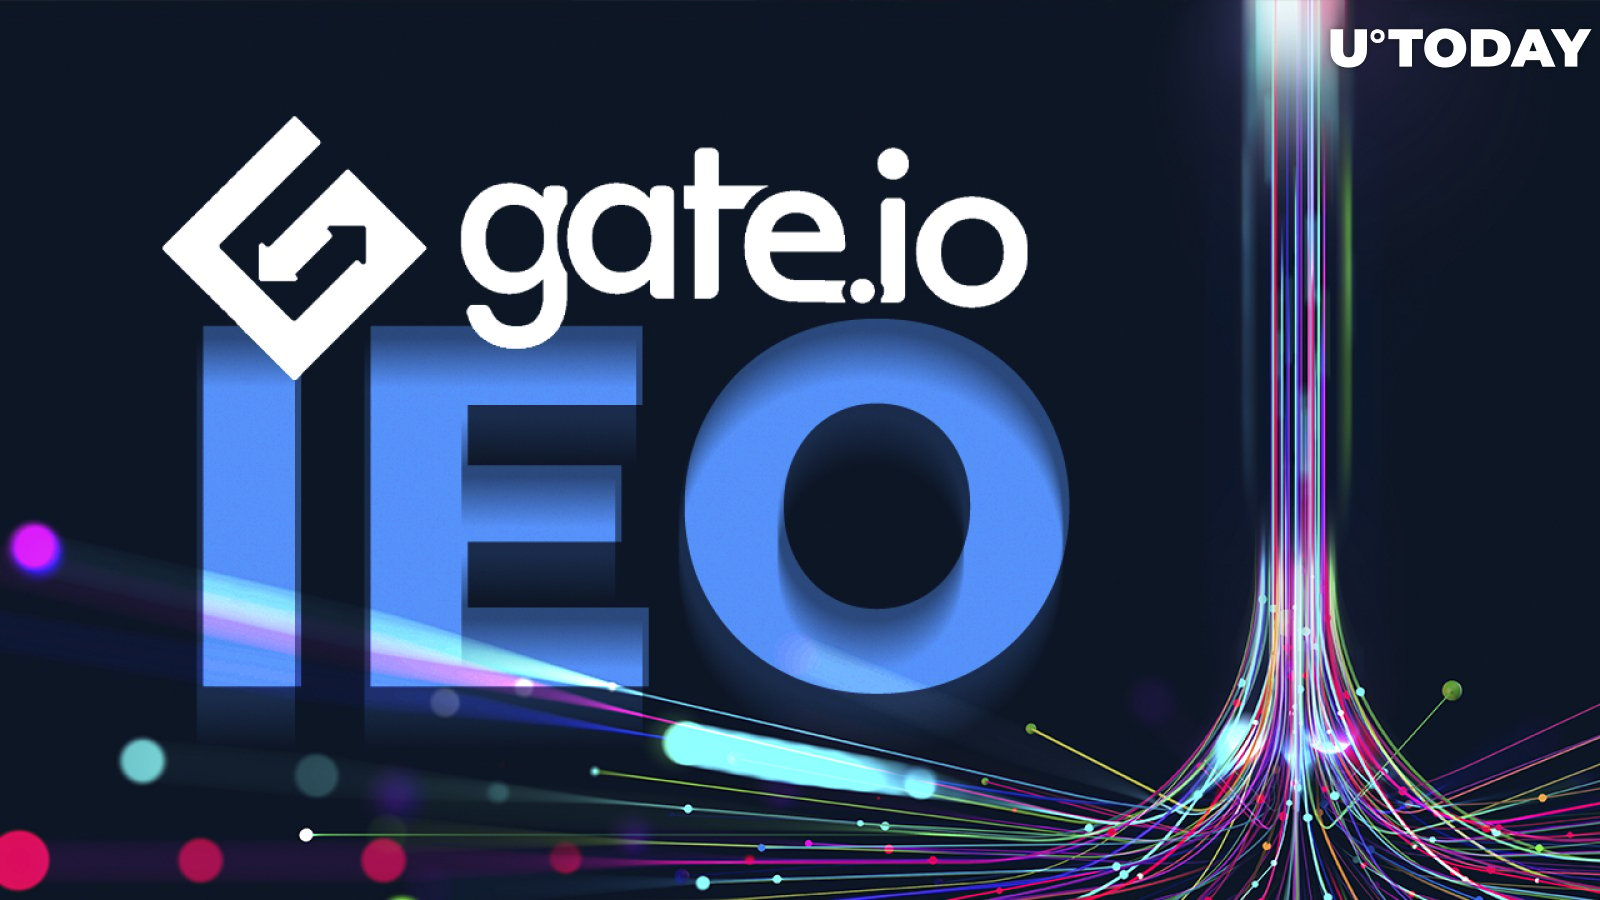 Gate.io Startup Introduces High-Yield IEO Launchpad With Advanced Security: Review